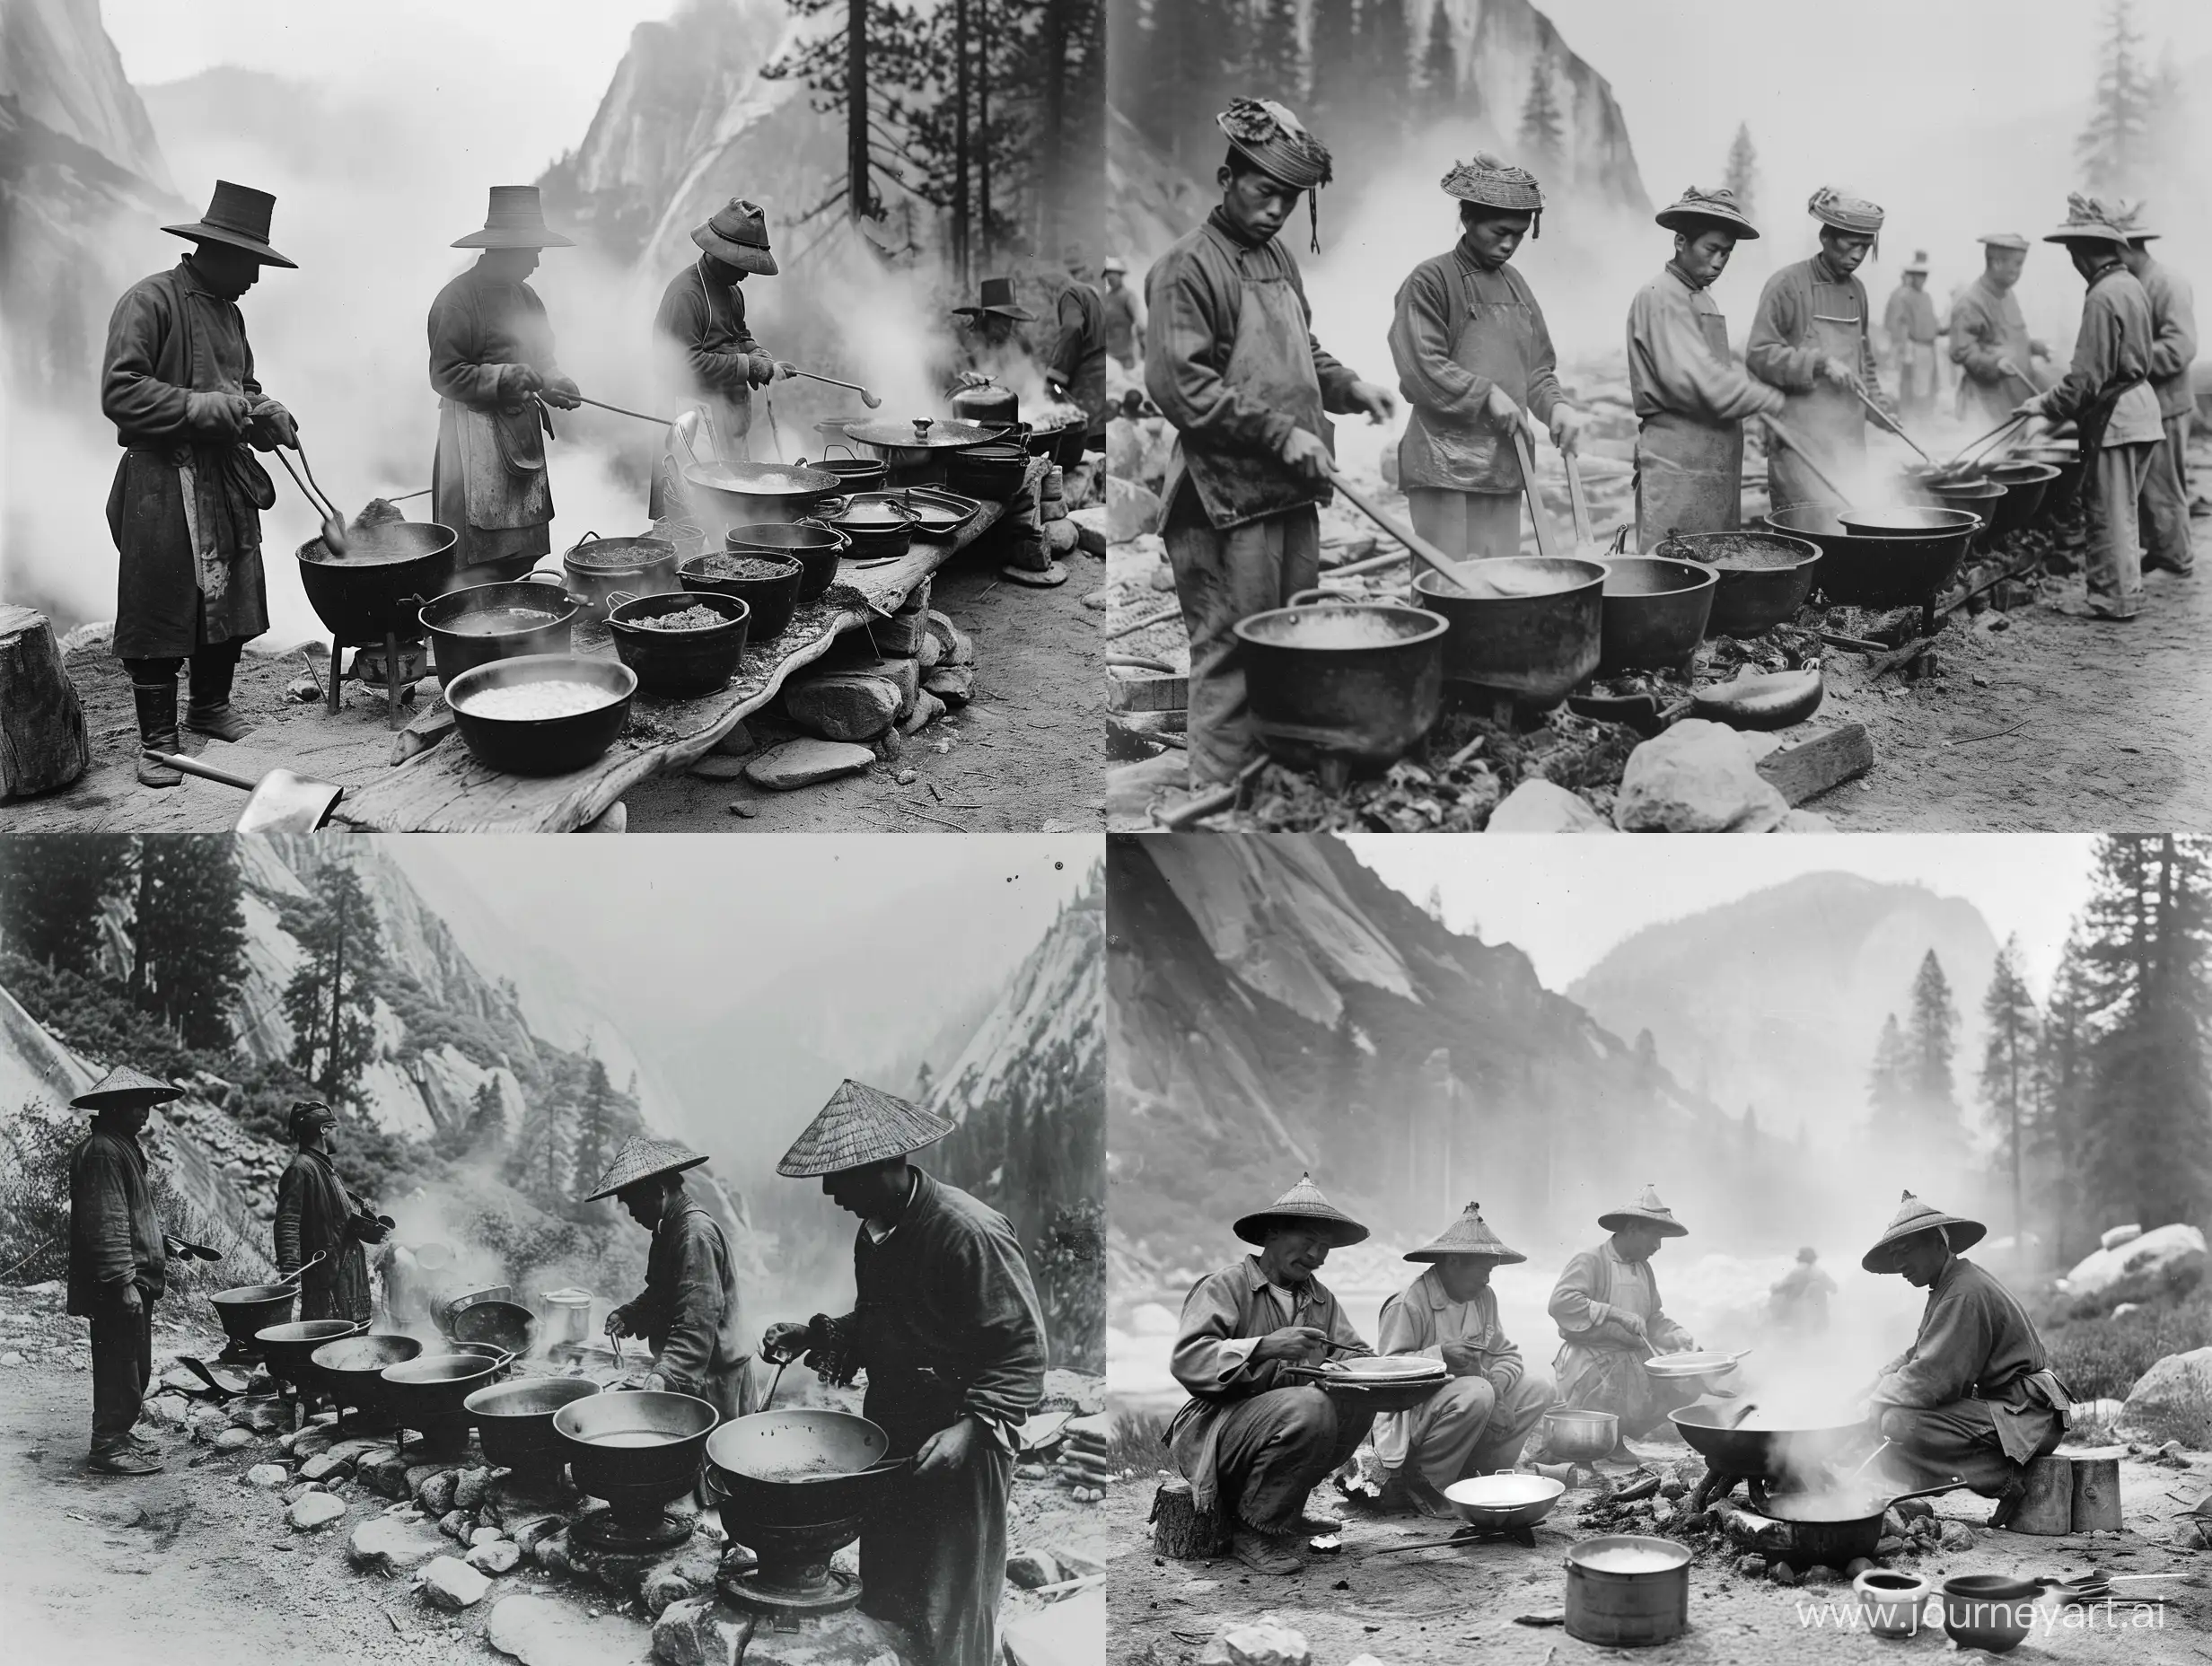 Chinese-Workers-Cooking-at-Yosemite-in-the-Late-1800s